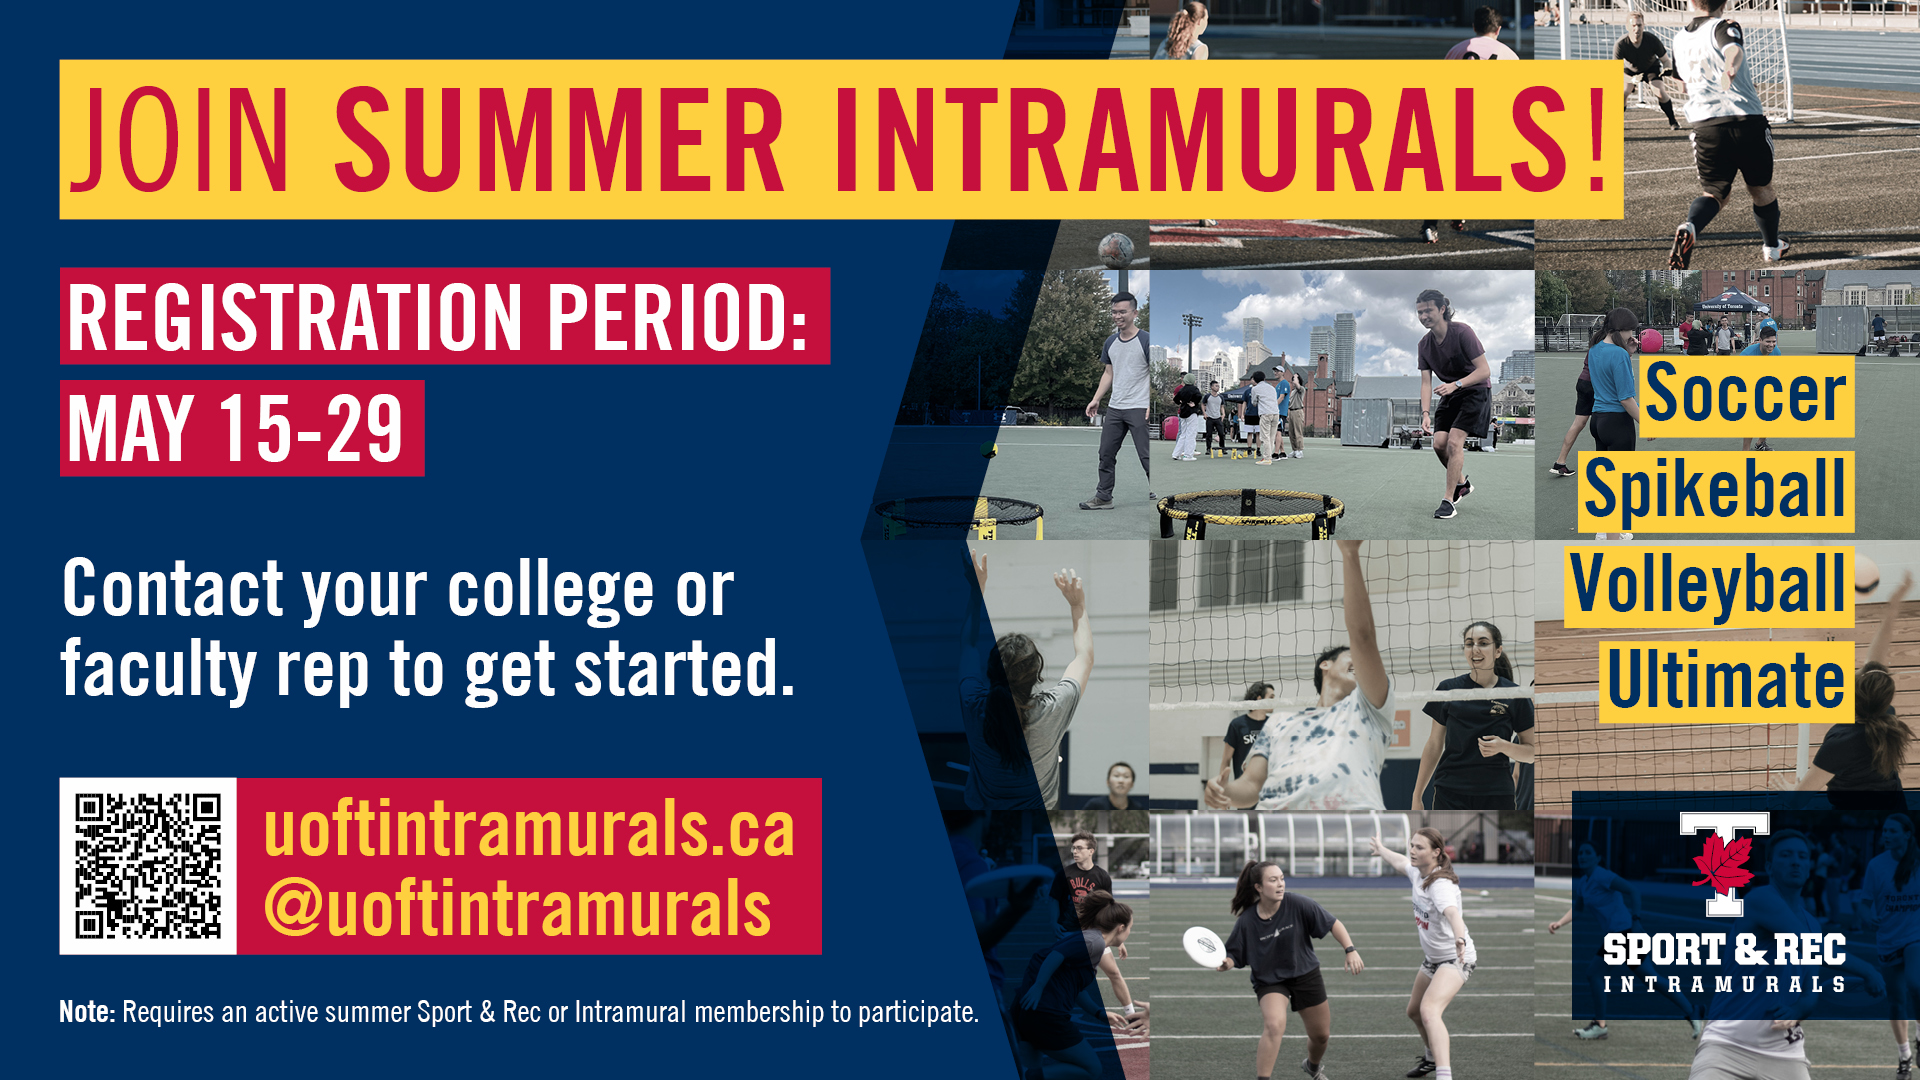 promotional ad to showcase intramurals sports and registration period May 15-29.